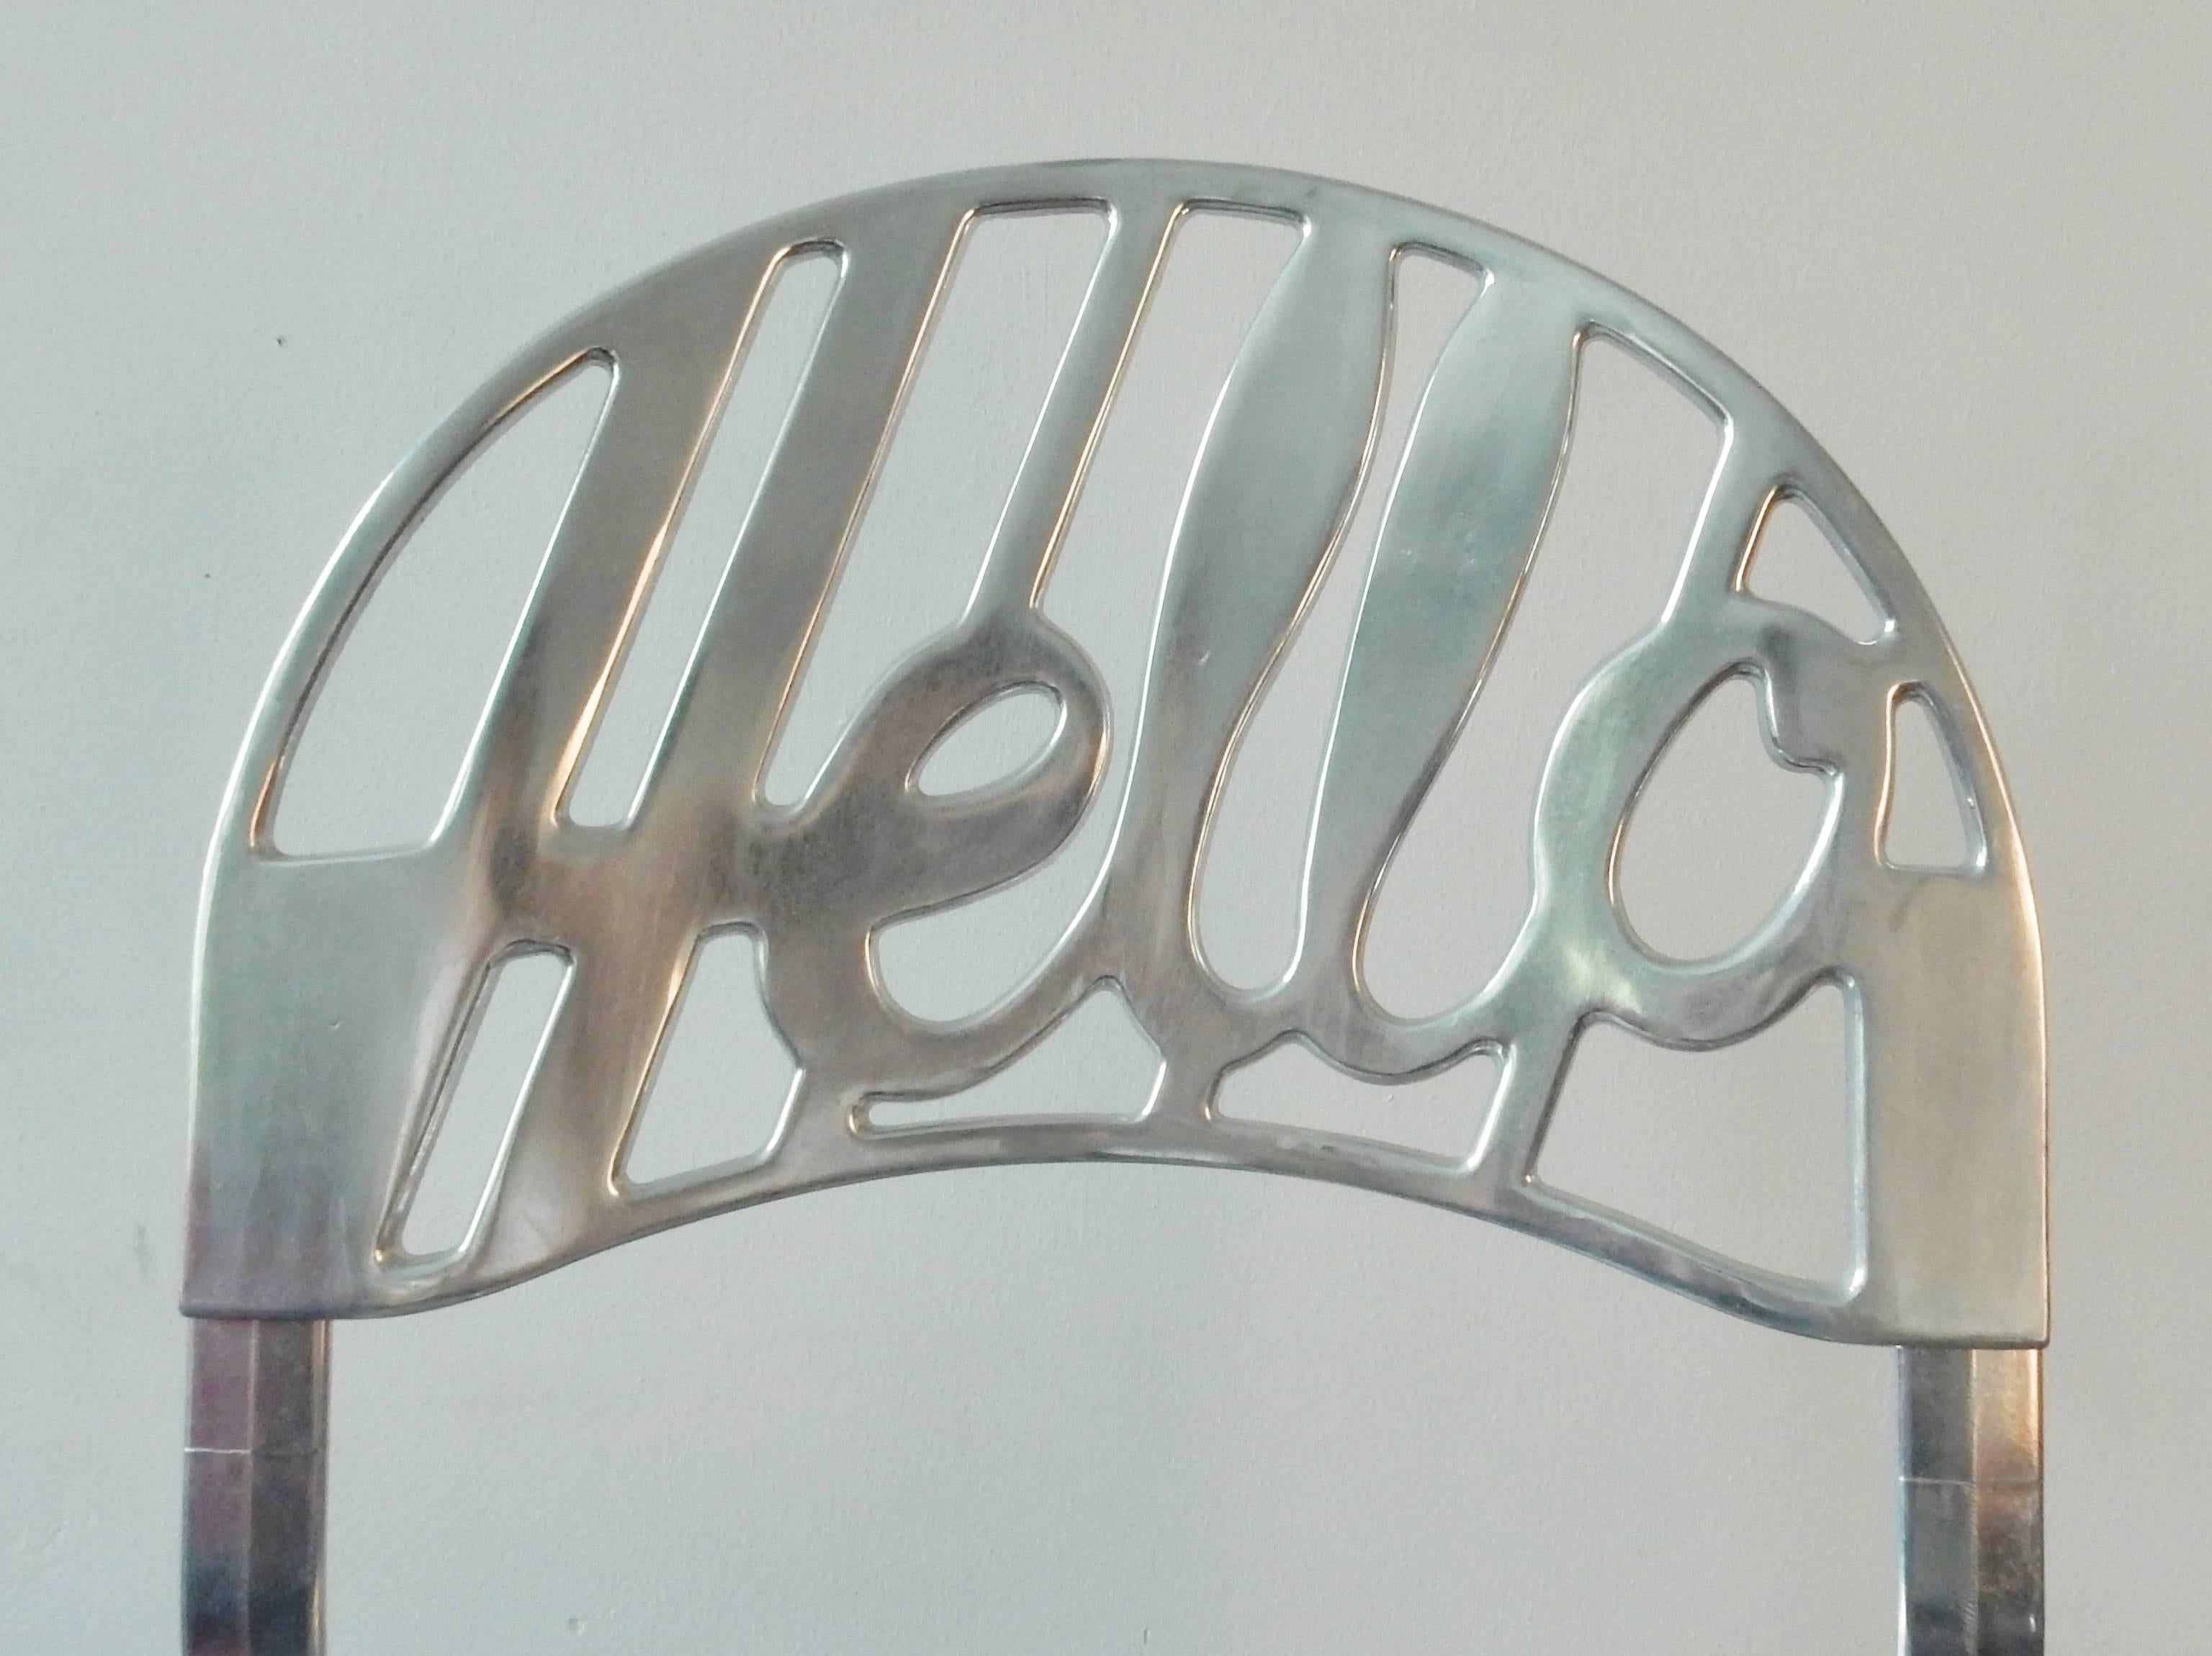 Iconic chair by Jeremy Harvey for Artifort. Very playful design that would do great at an entrance or in a hallway. This Hello There chair is in a very good condition with some minor signs of age and use.